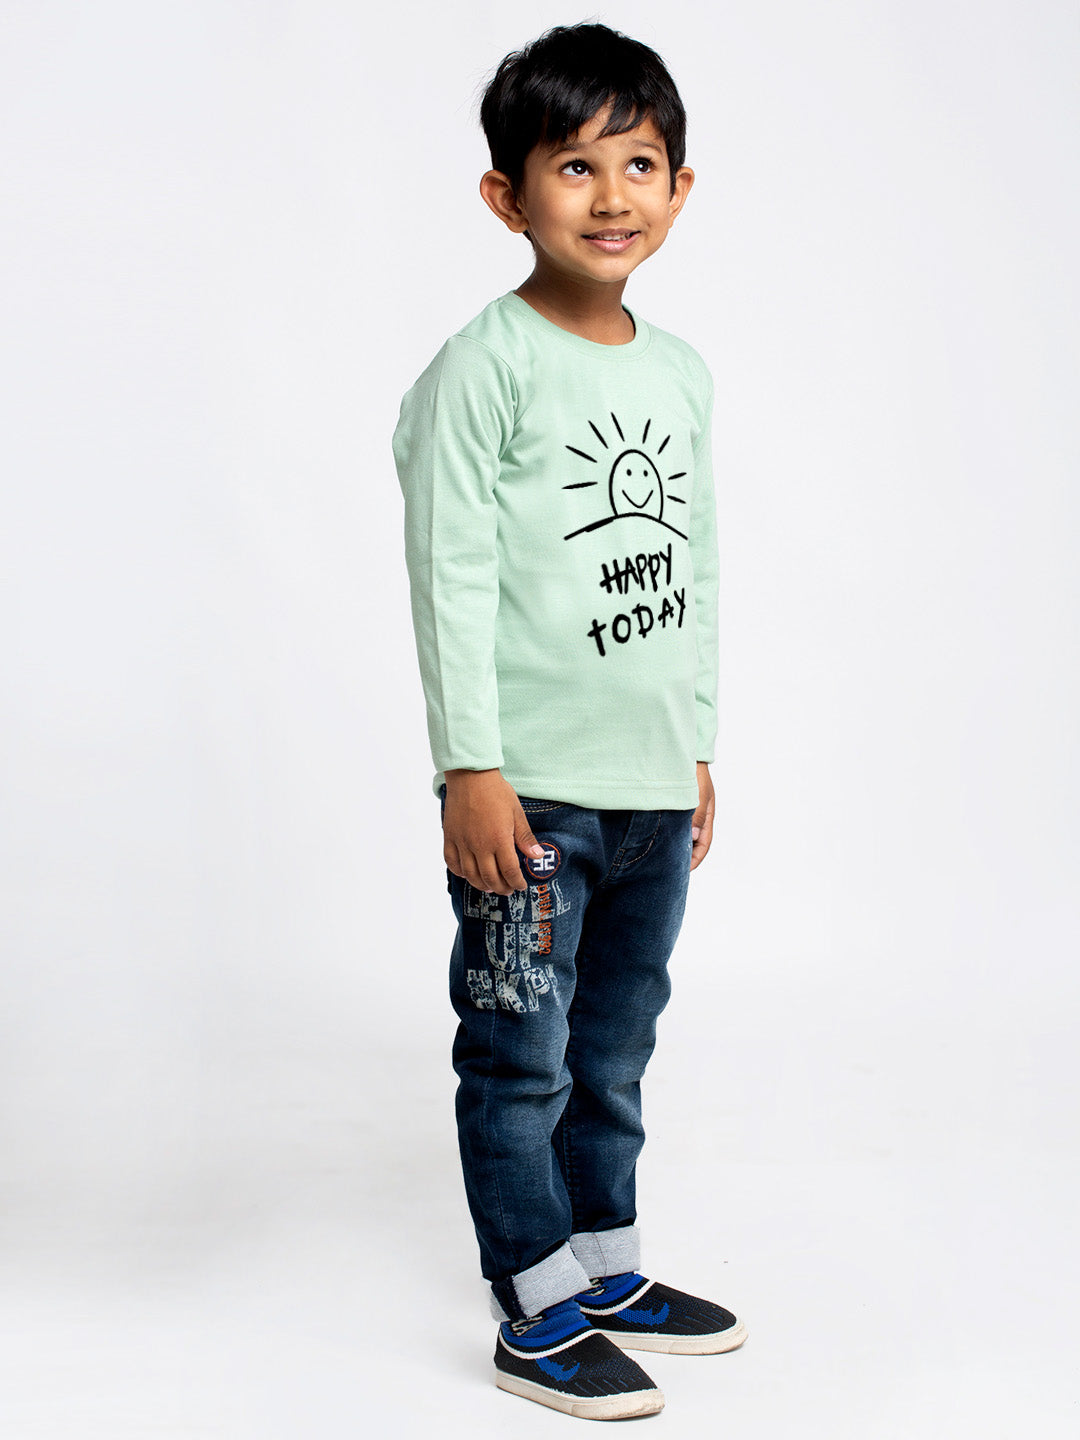 Kids happy today printed full sleeves t-shirt - Friskers